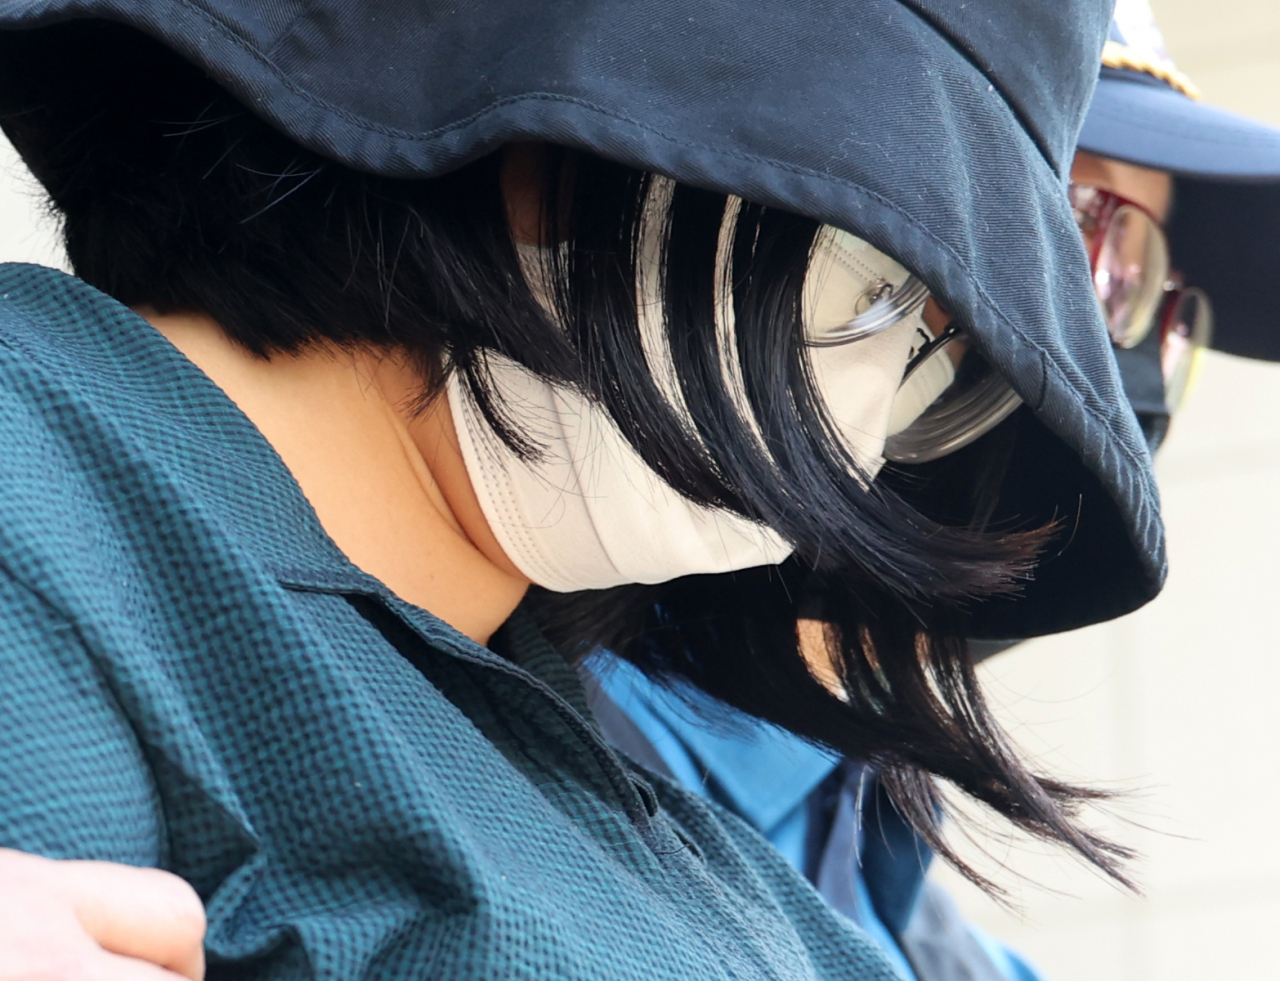 Murder suspect Jung Yoo-jung, wearing a hat and a mask, leaves a police detention center to be taken to the prosecutors office in Busan on June 2. (Yonhap)